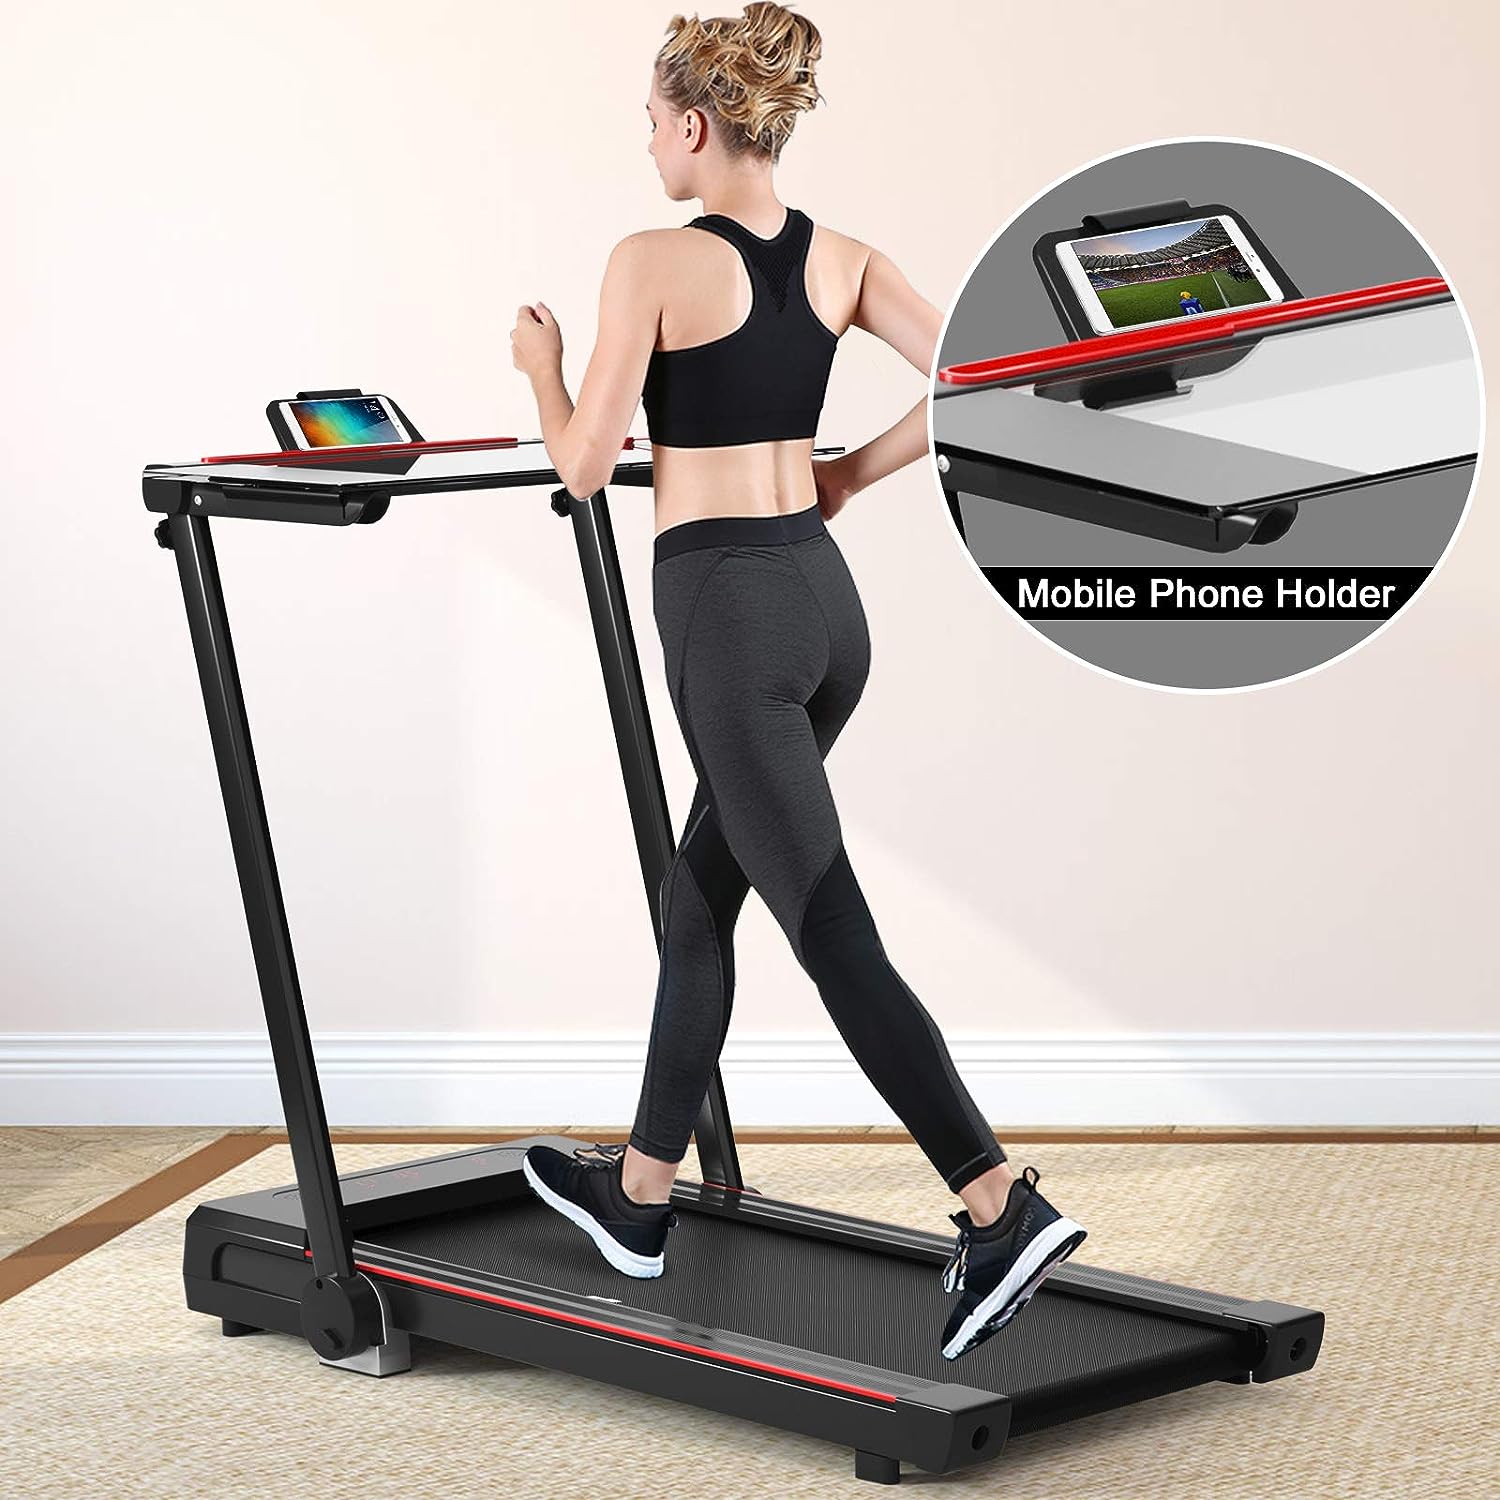 Goplus 3-in-1 Treadmill with Large Desk, 2.25HP Folding Electric Treadmill - $220